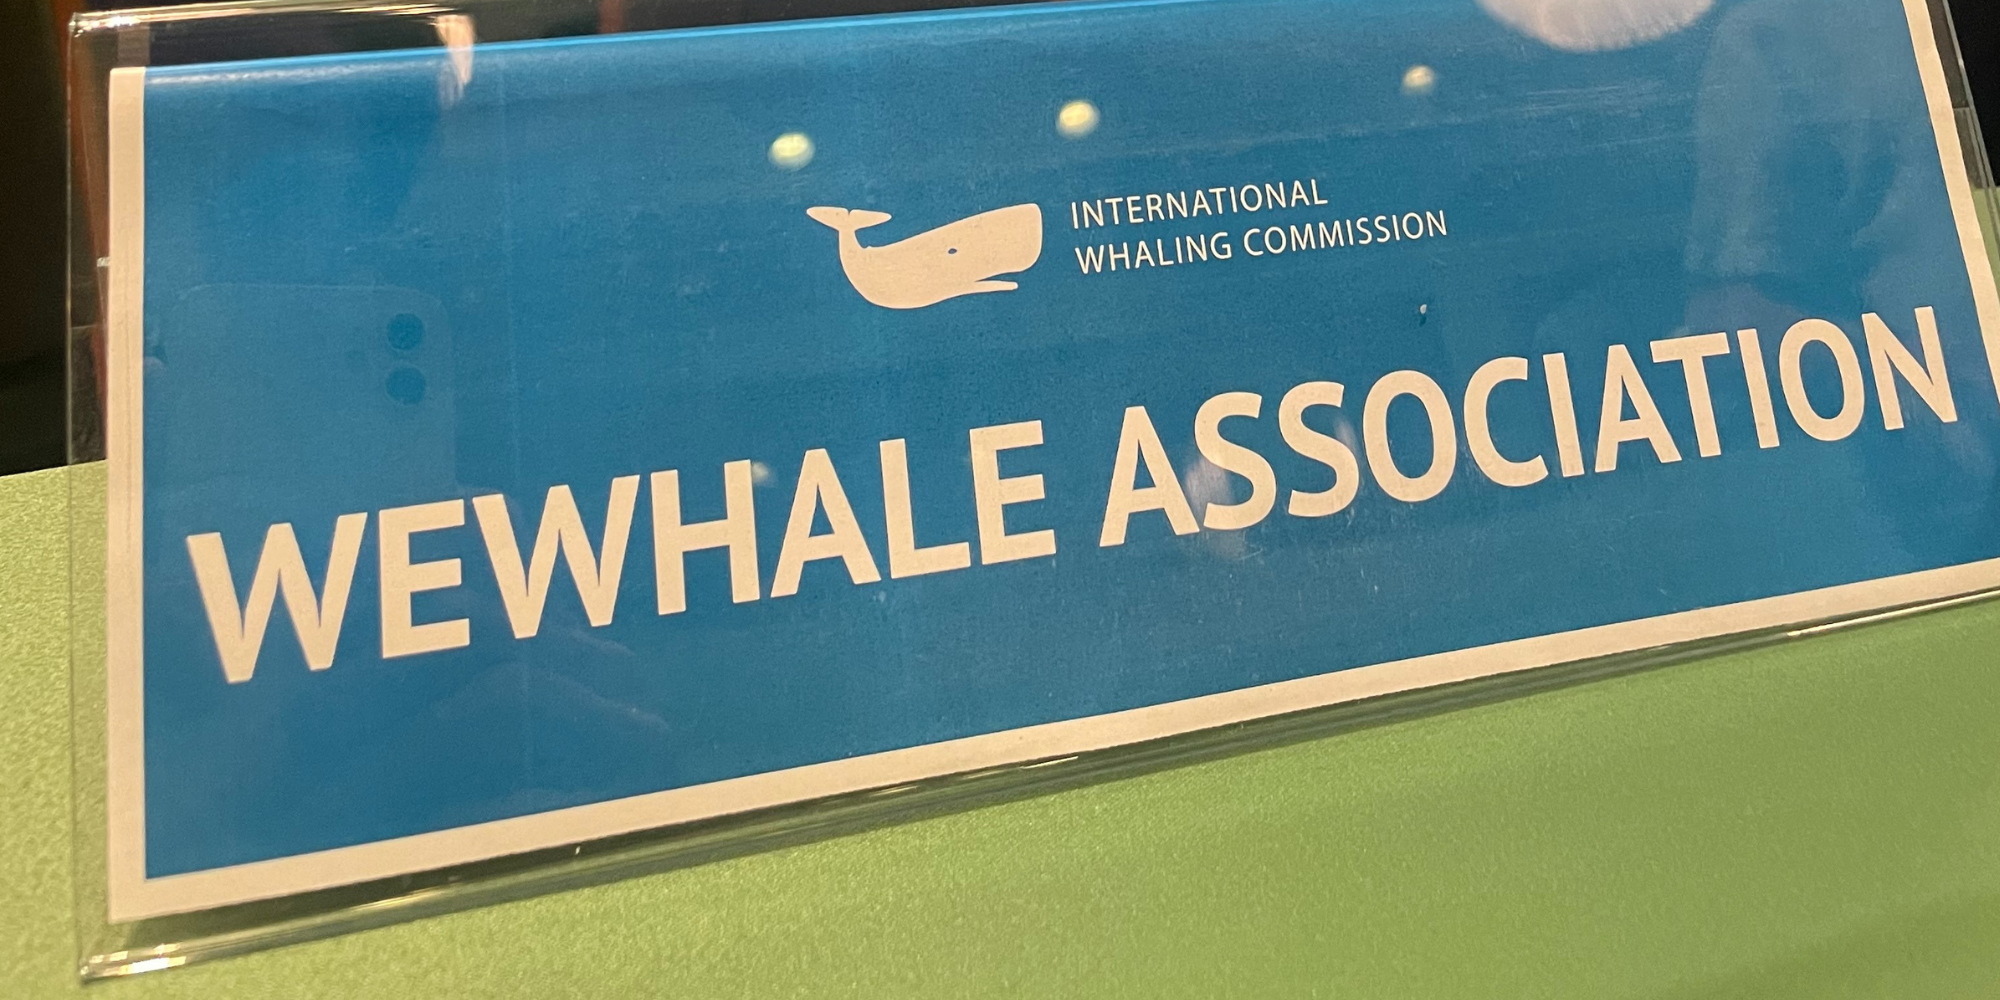 International Whaling Commission